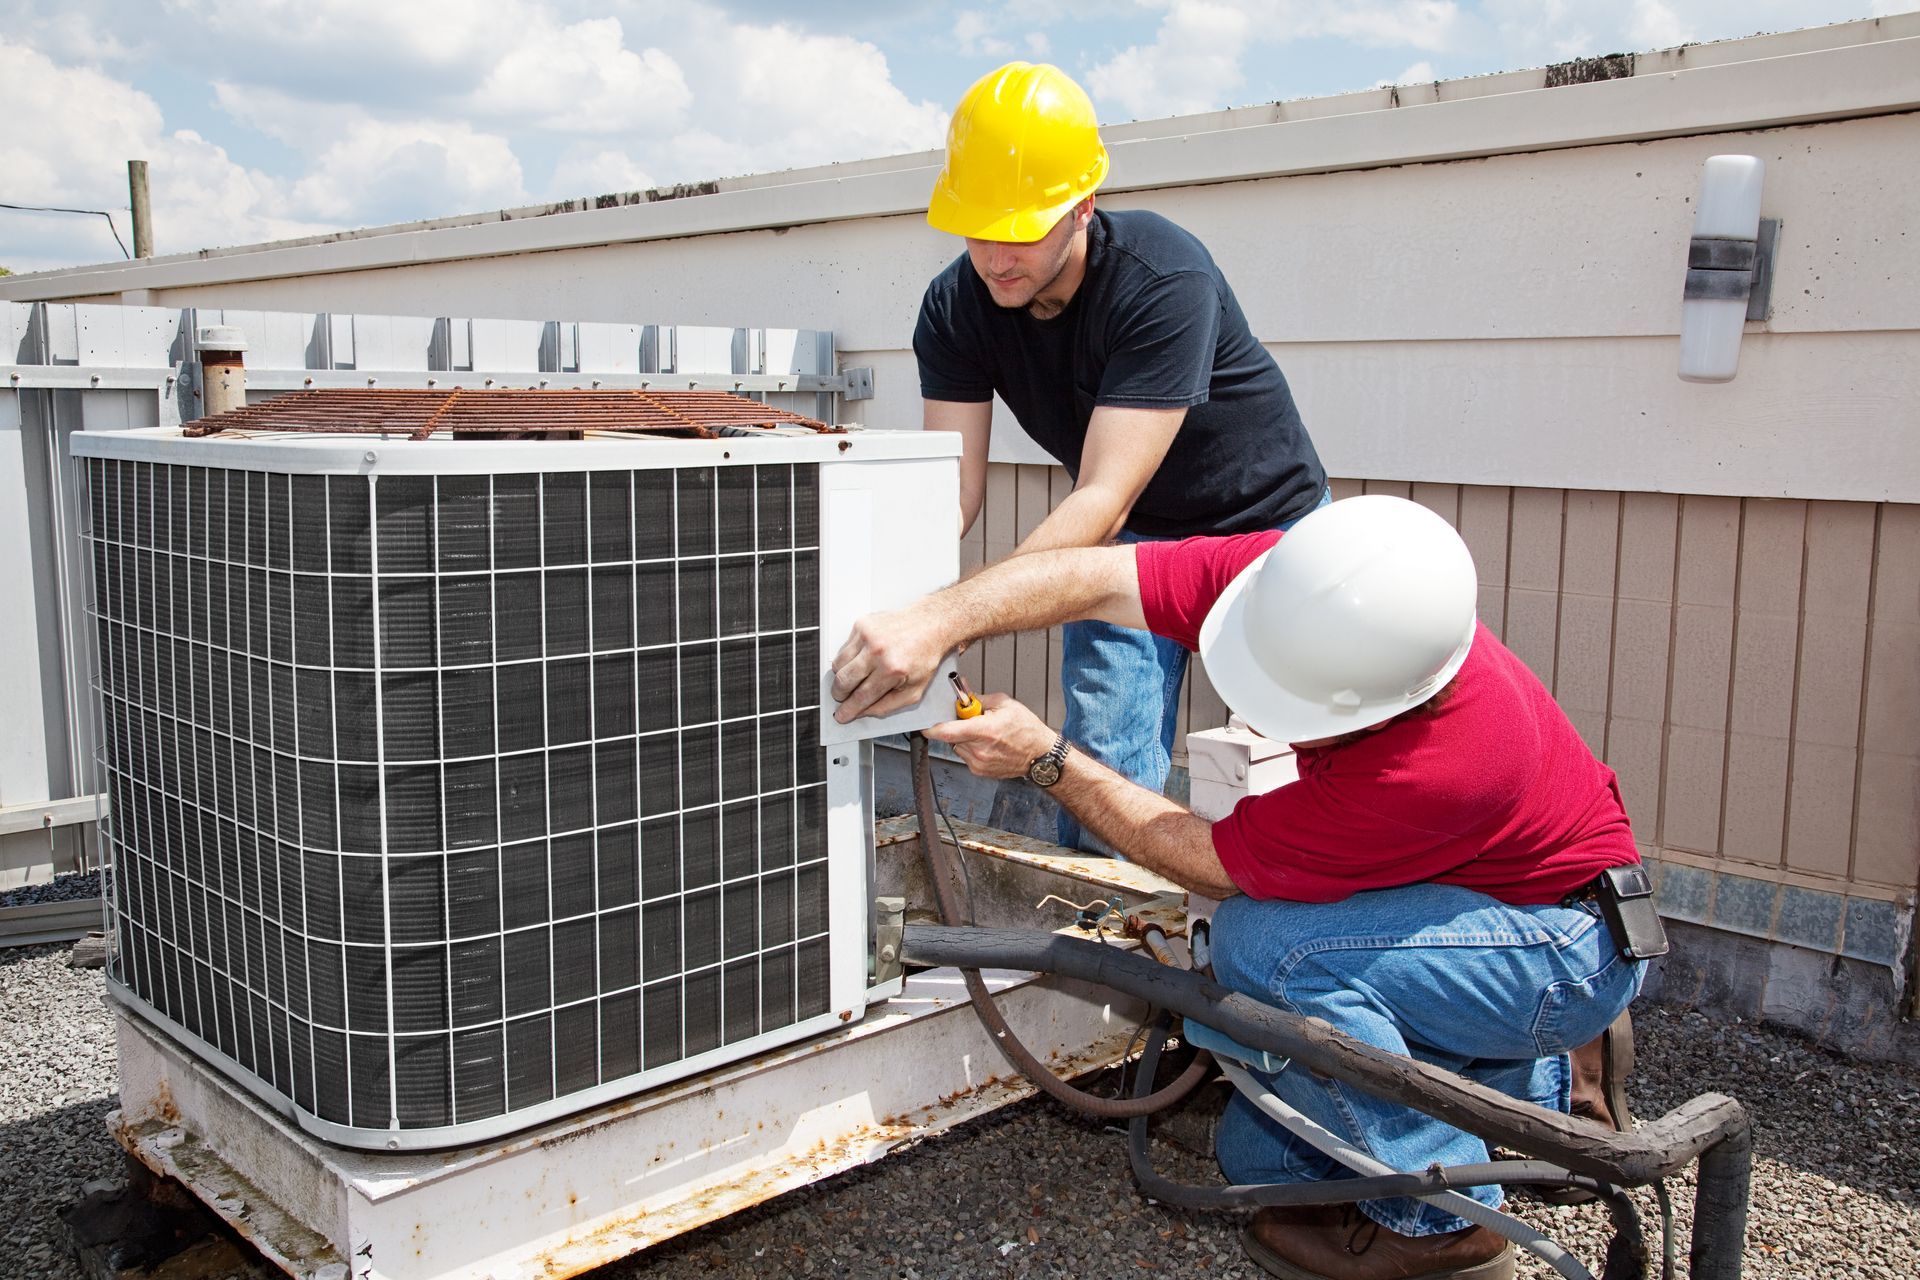 A man wearing a hard hat and gloves is working on an air conditioner.